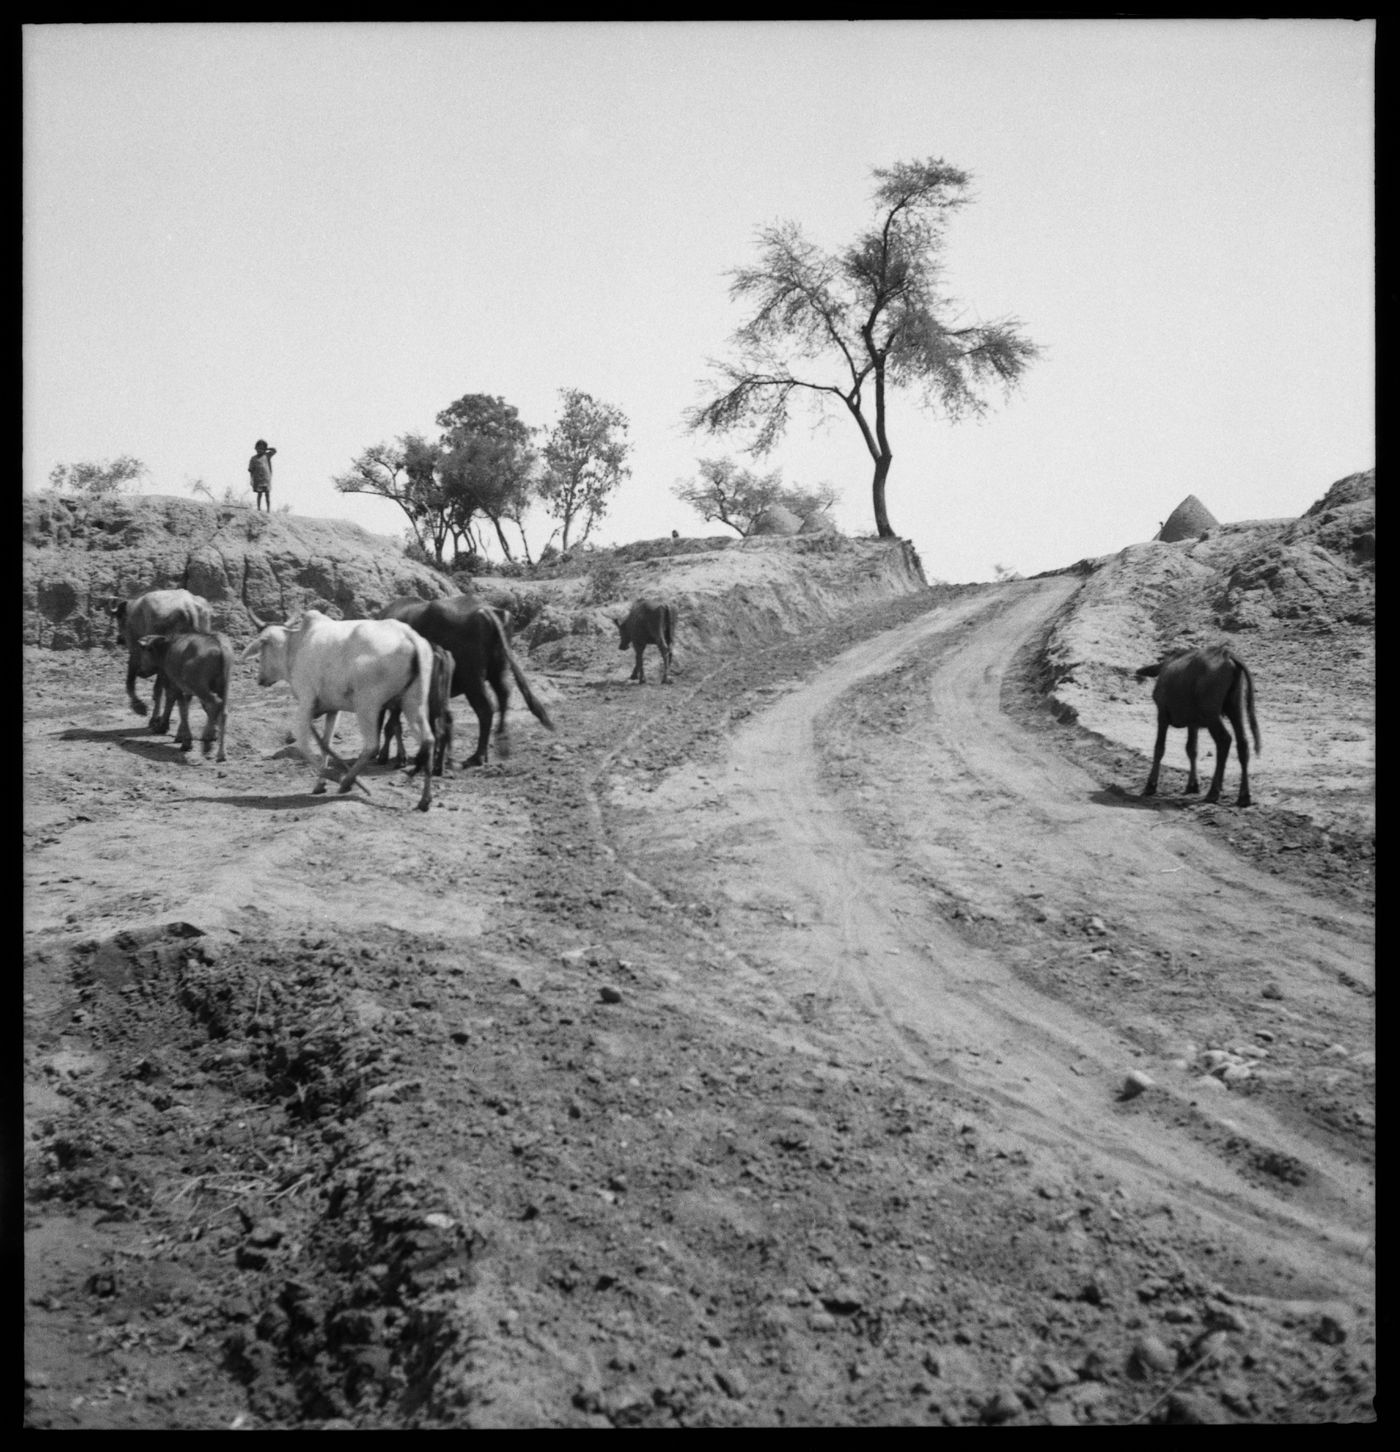 Cows along a road  in Chandigarh's area before the construction, India